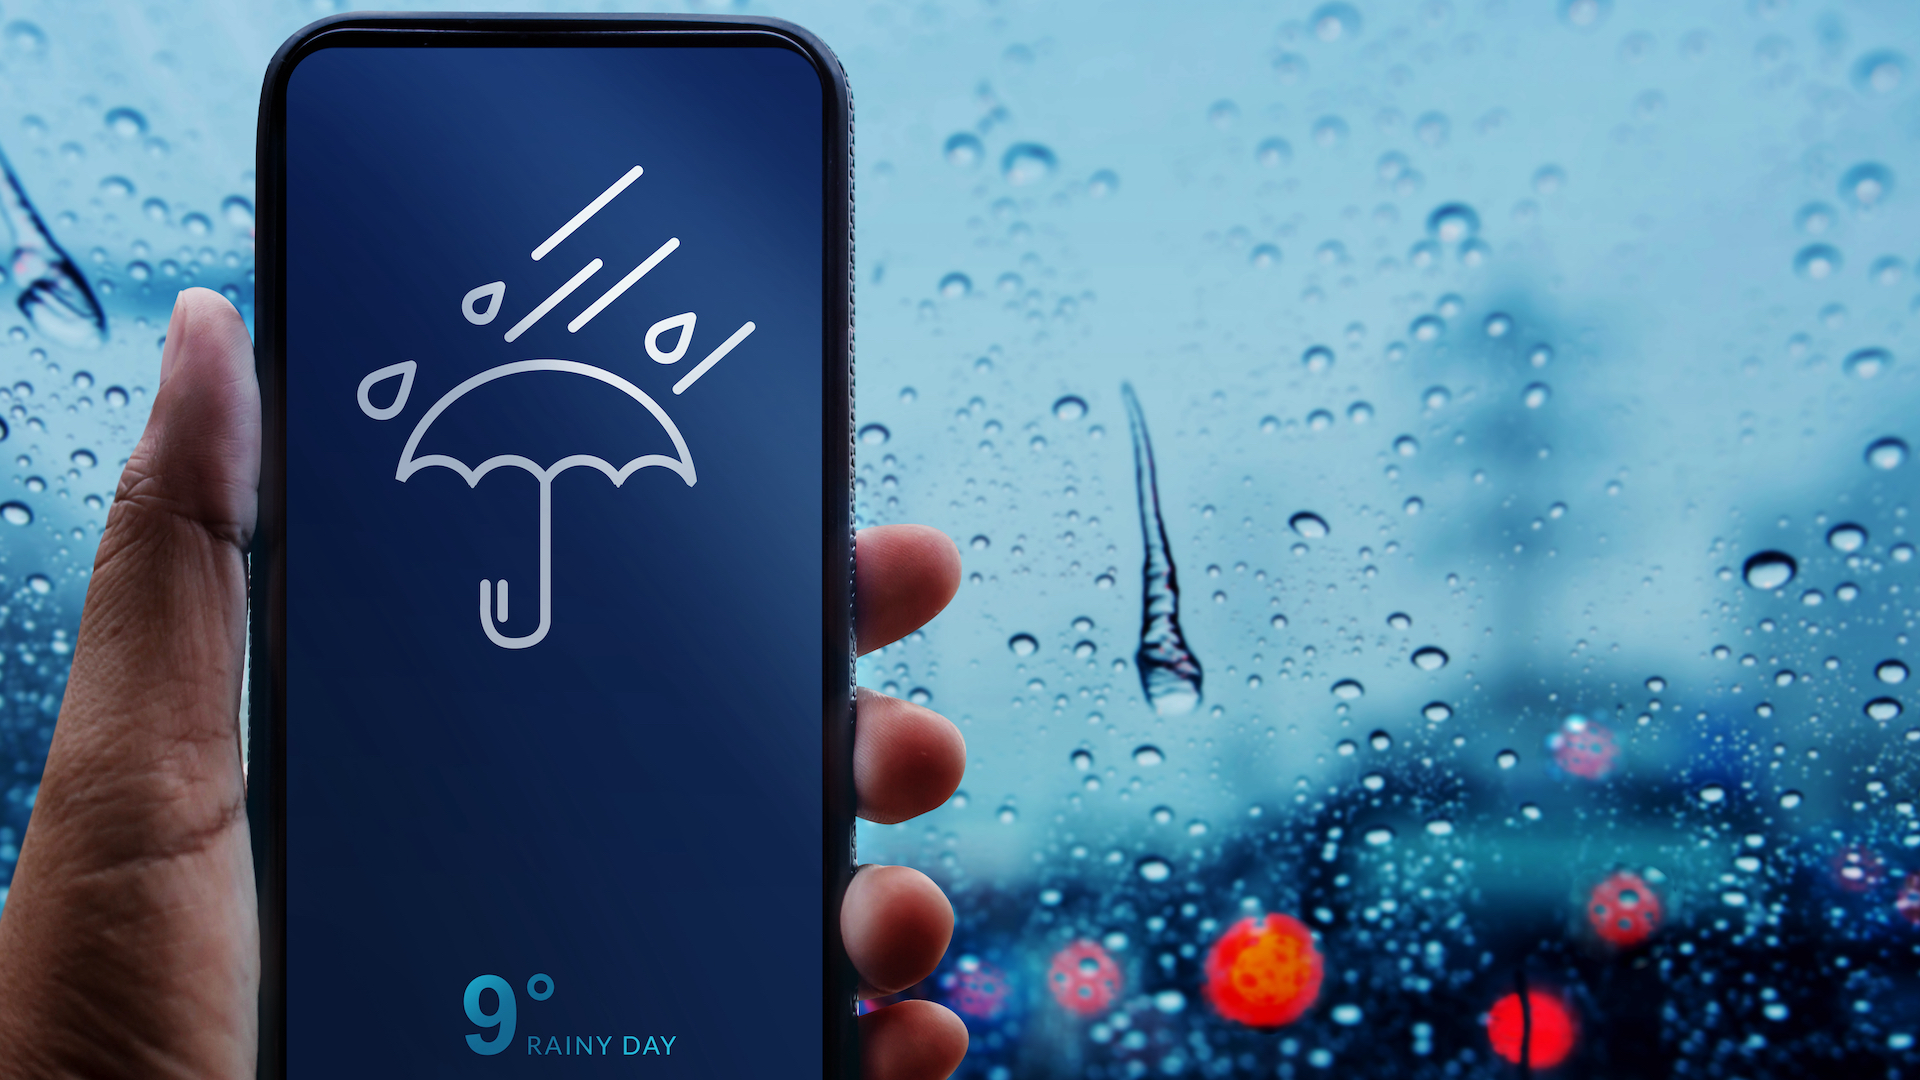 An app showing the weather on a rainy day